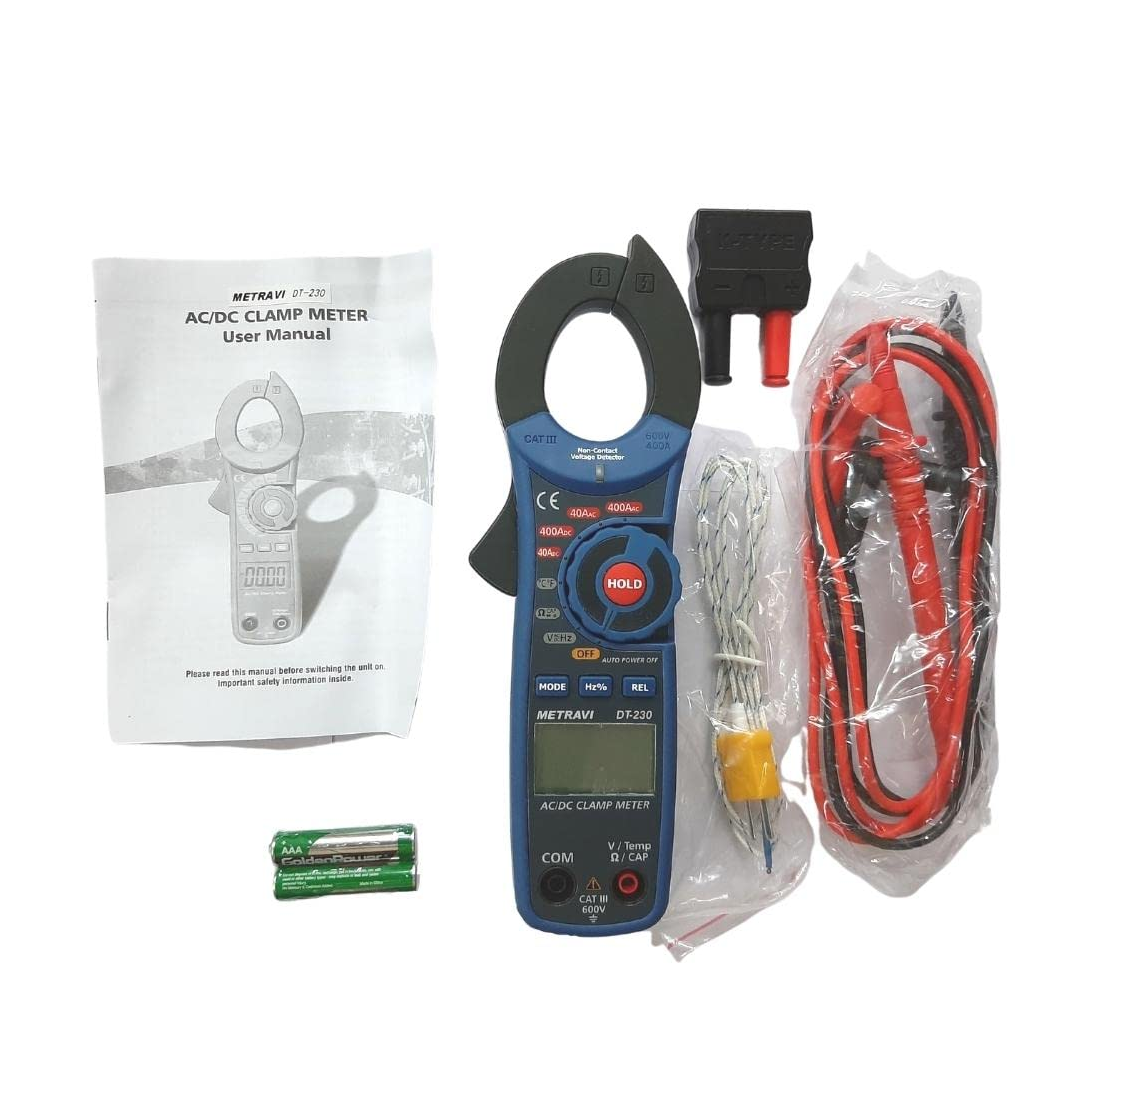 Metravi DT-230 Digital AC/DC Clamp Meter upto 400A with Resistance, Frequency and Temperature, Fully Protected